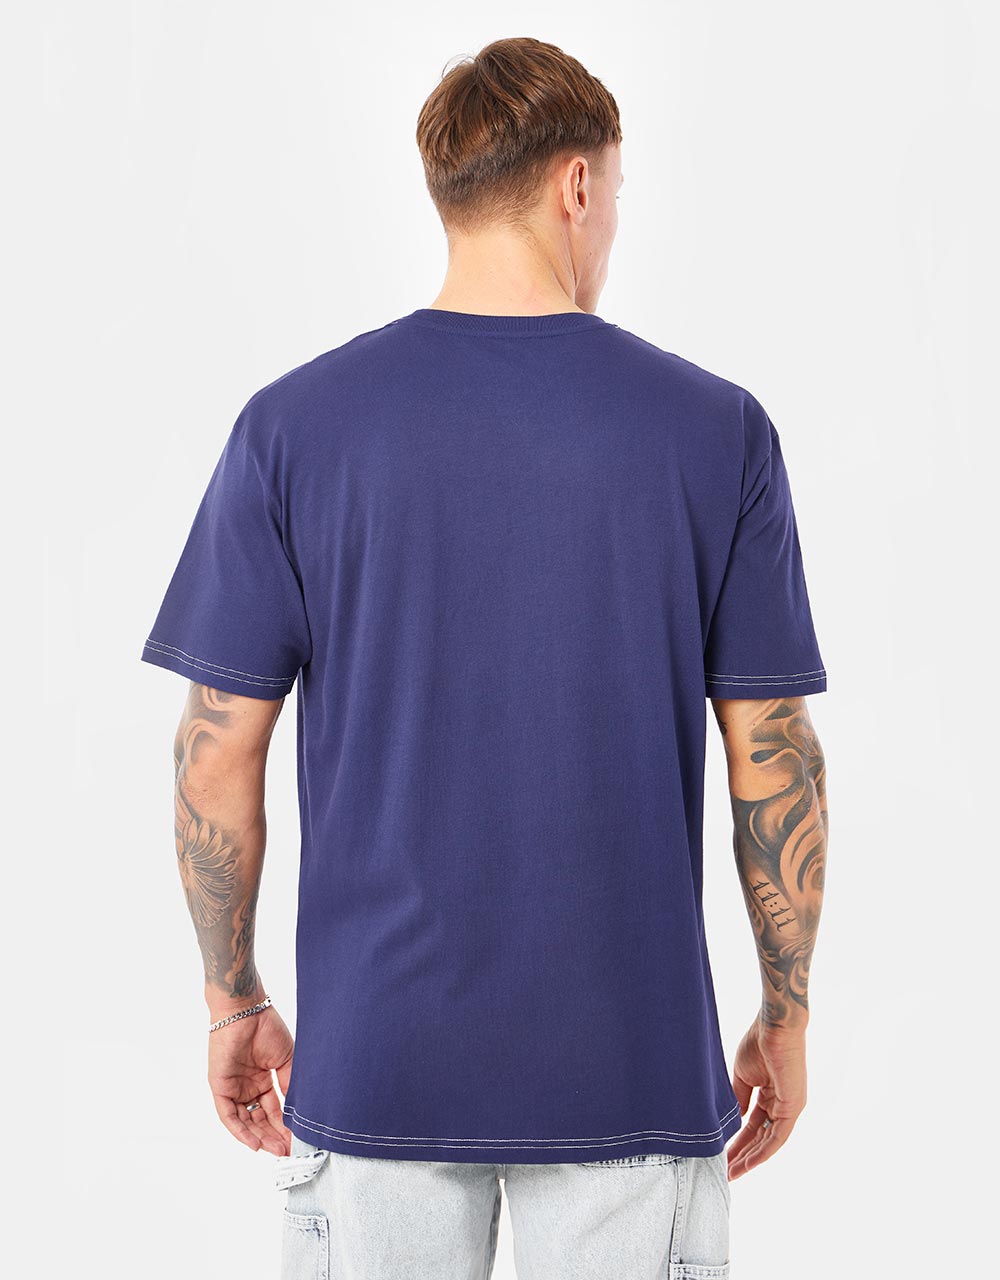 Route One Organic Chest Logo T-Shirt - Navy